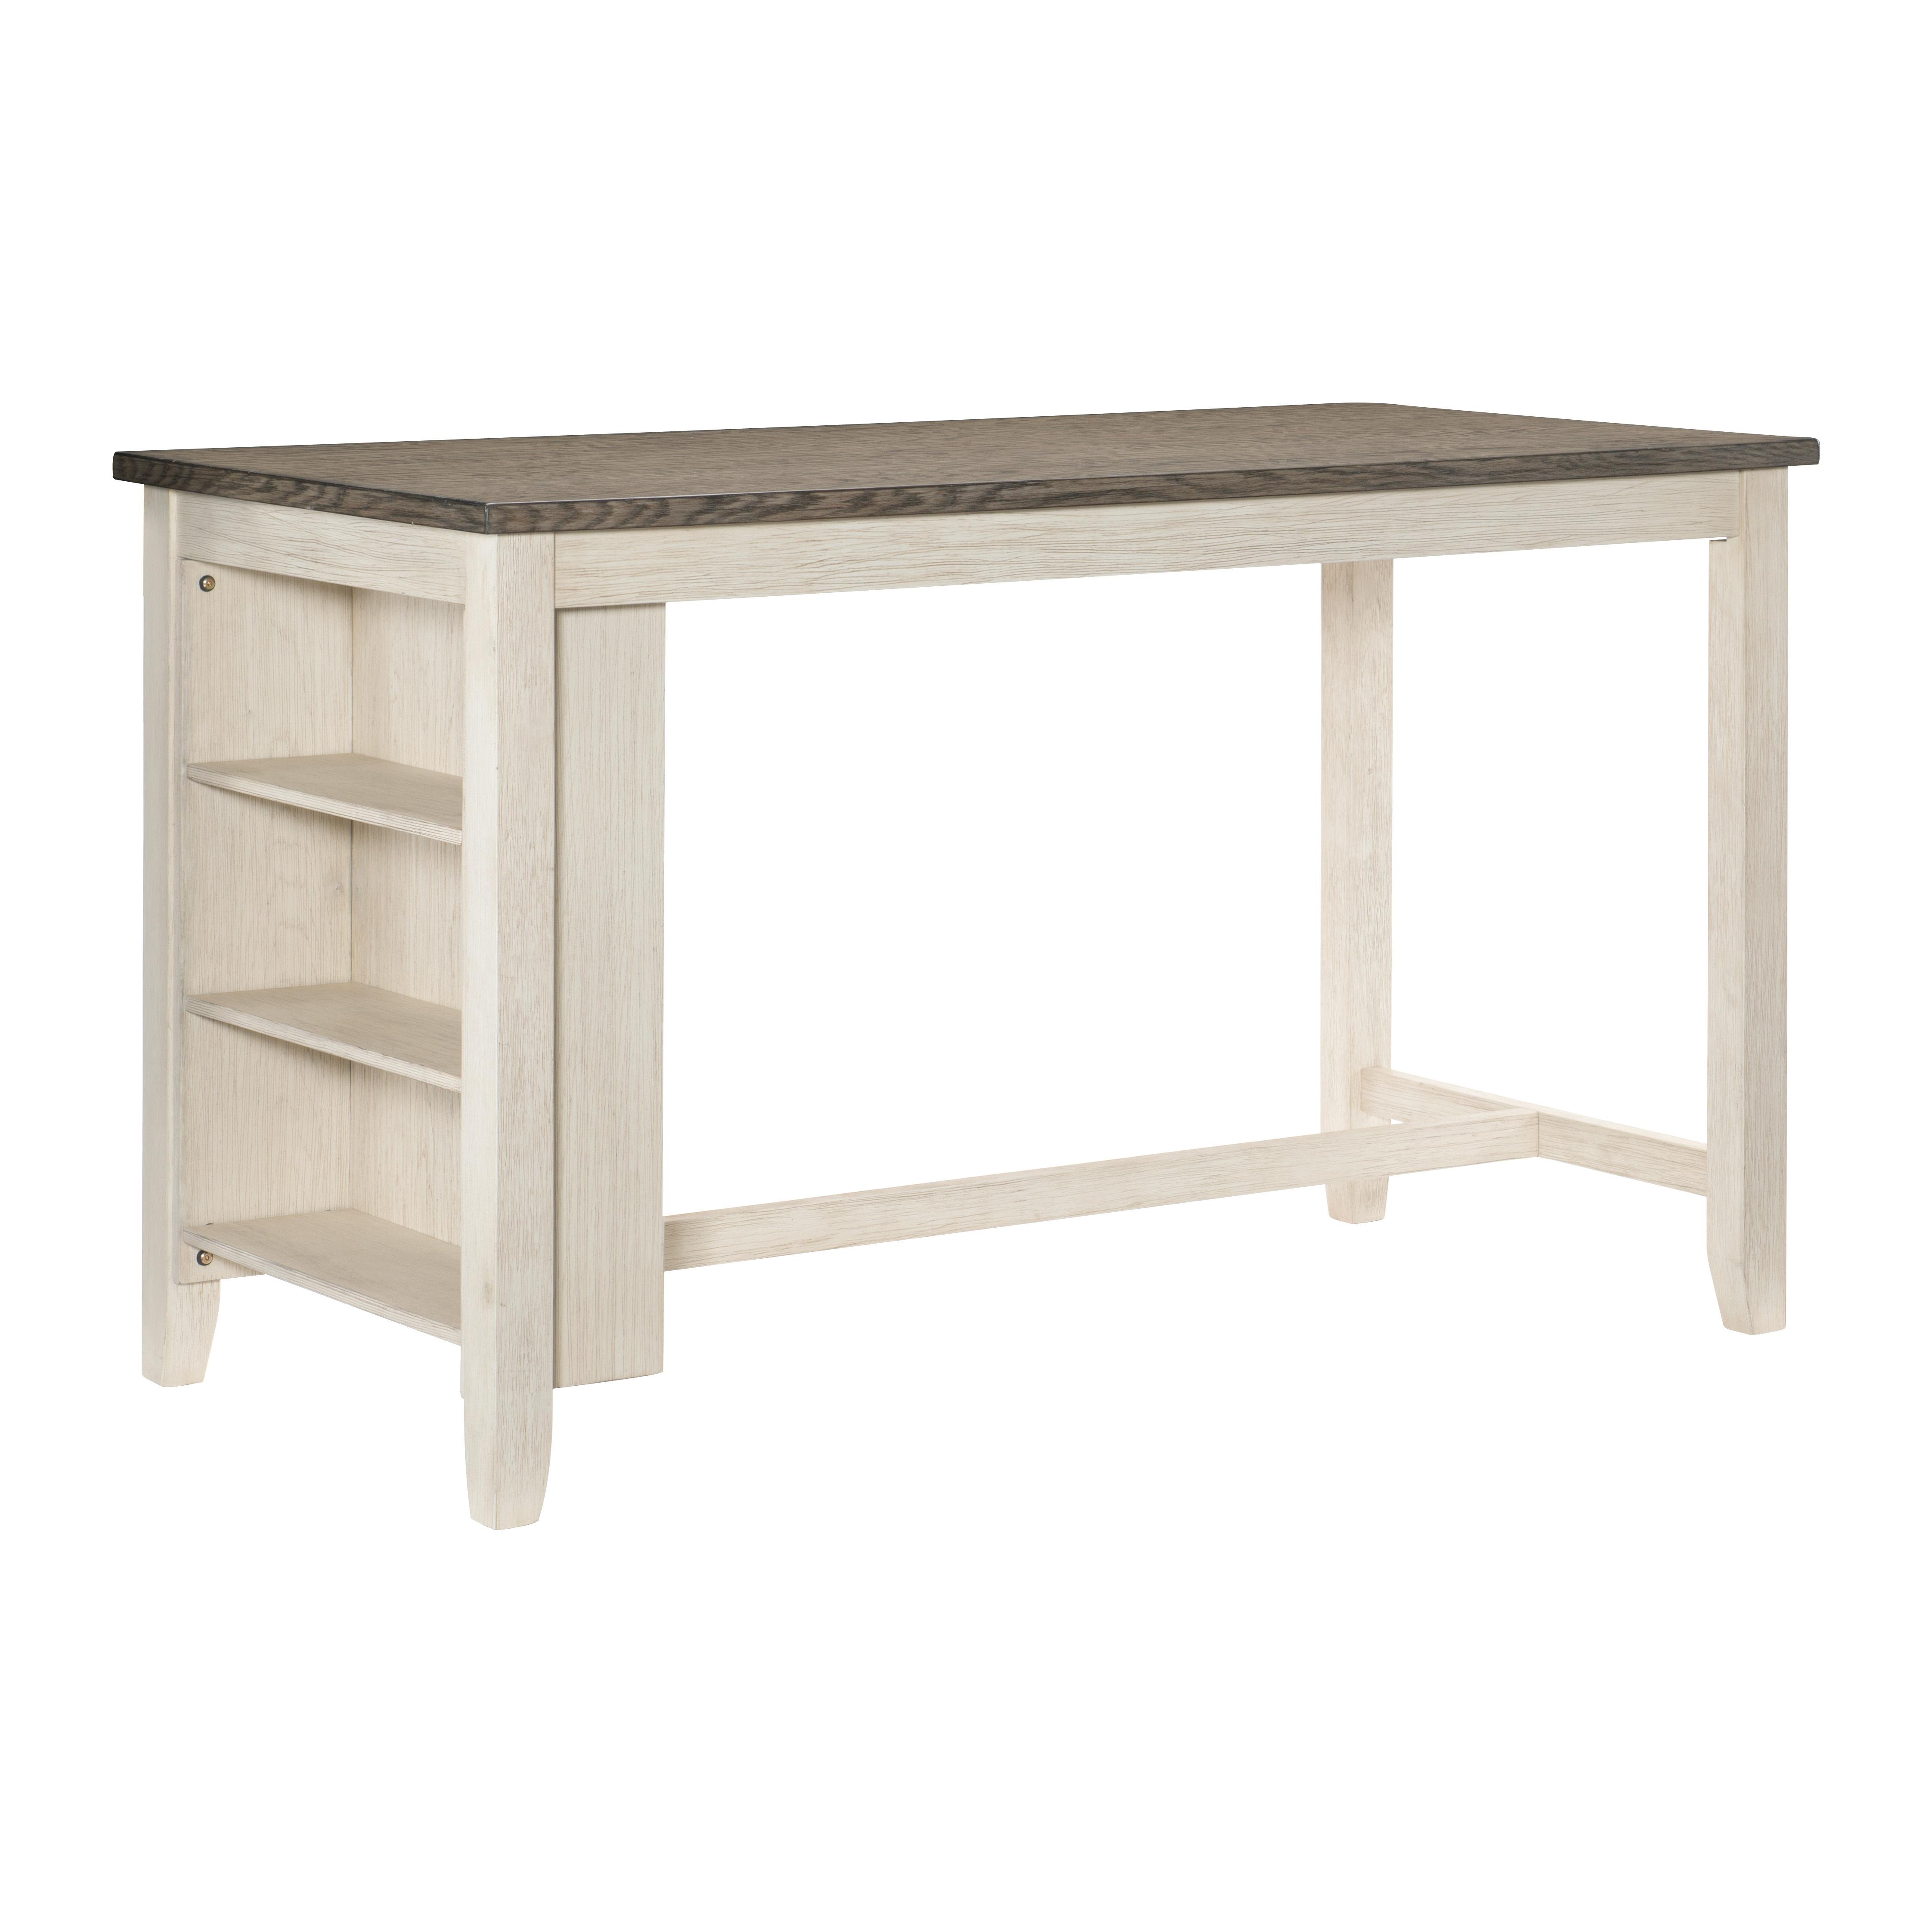 Transitional Counter Height Table 5603WW-36 Timbre 5603WW-36 in Antique White 